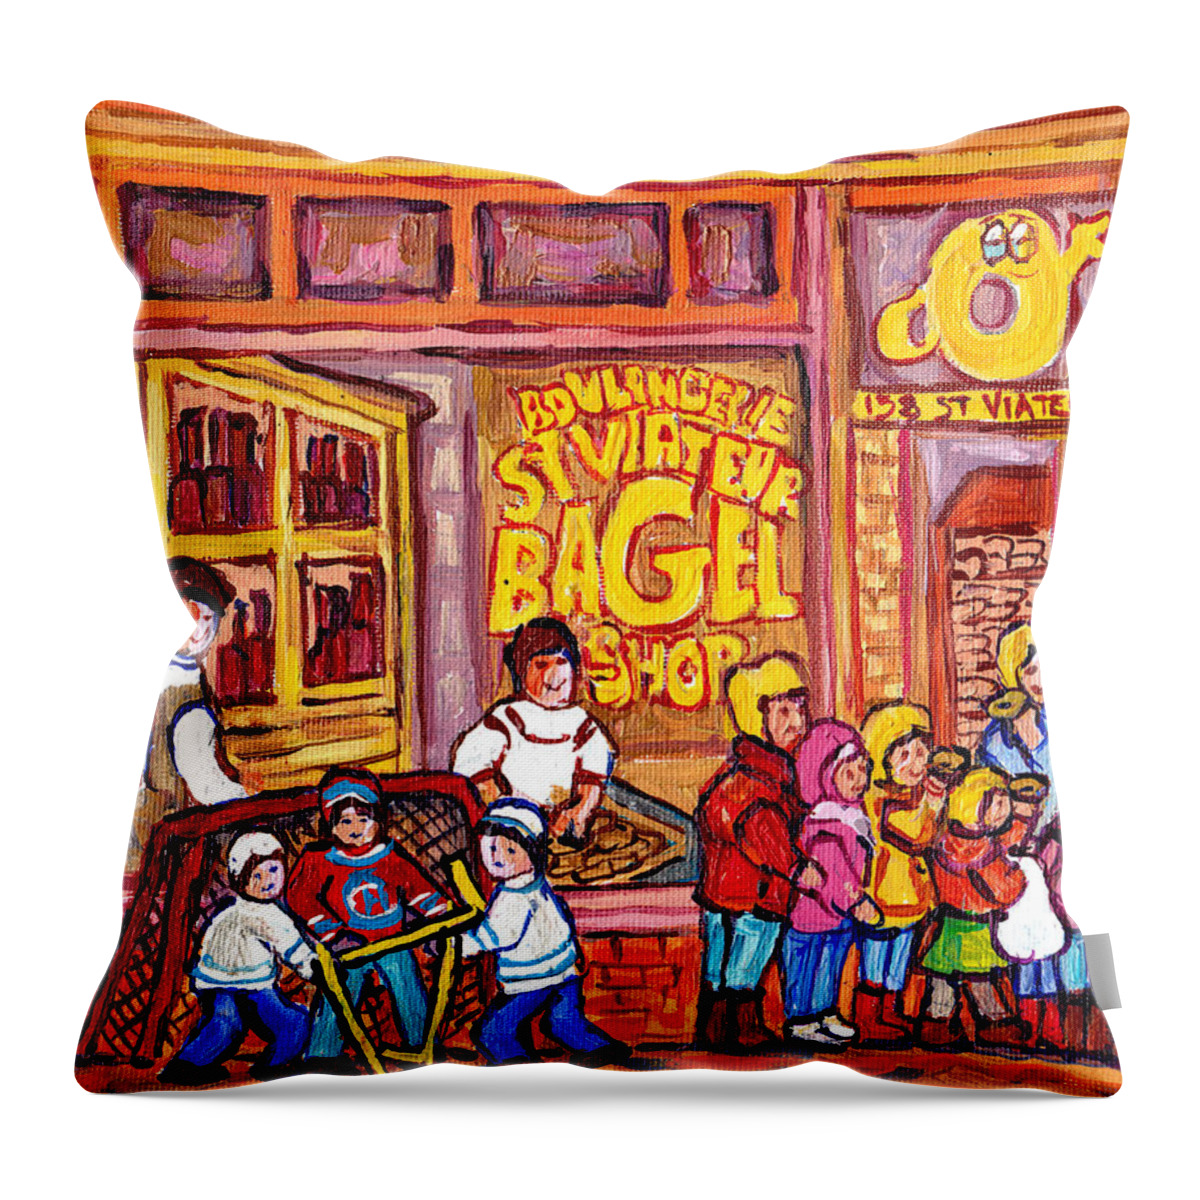 Montreal Throw Pillow featuring the painting St Viateur Bagel Shop Montreal Art Kids And Bagels Hockey Fun C Spandau Canadian City Scene Painting by Carole Spandau